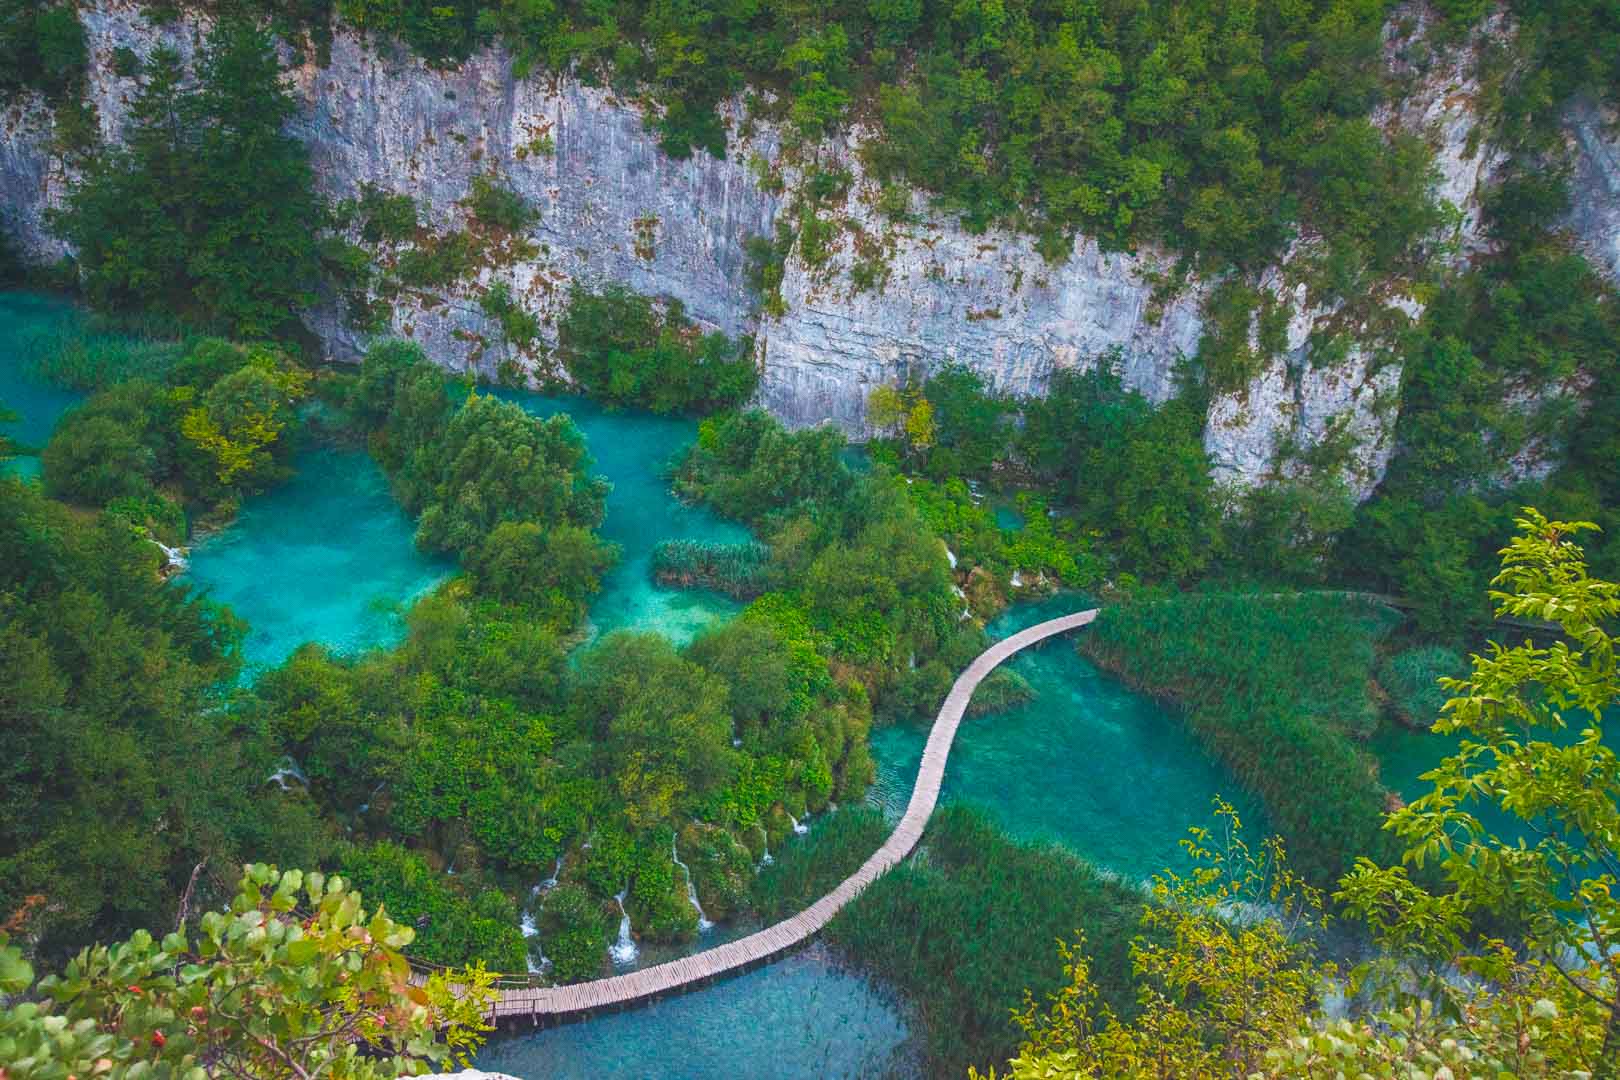 5 Reasons to Never Visit Plitvice Lakes National Park (+1 Reason to Visit)